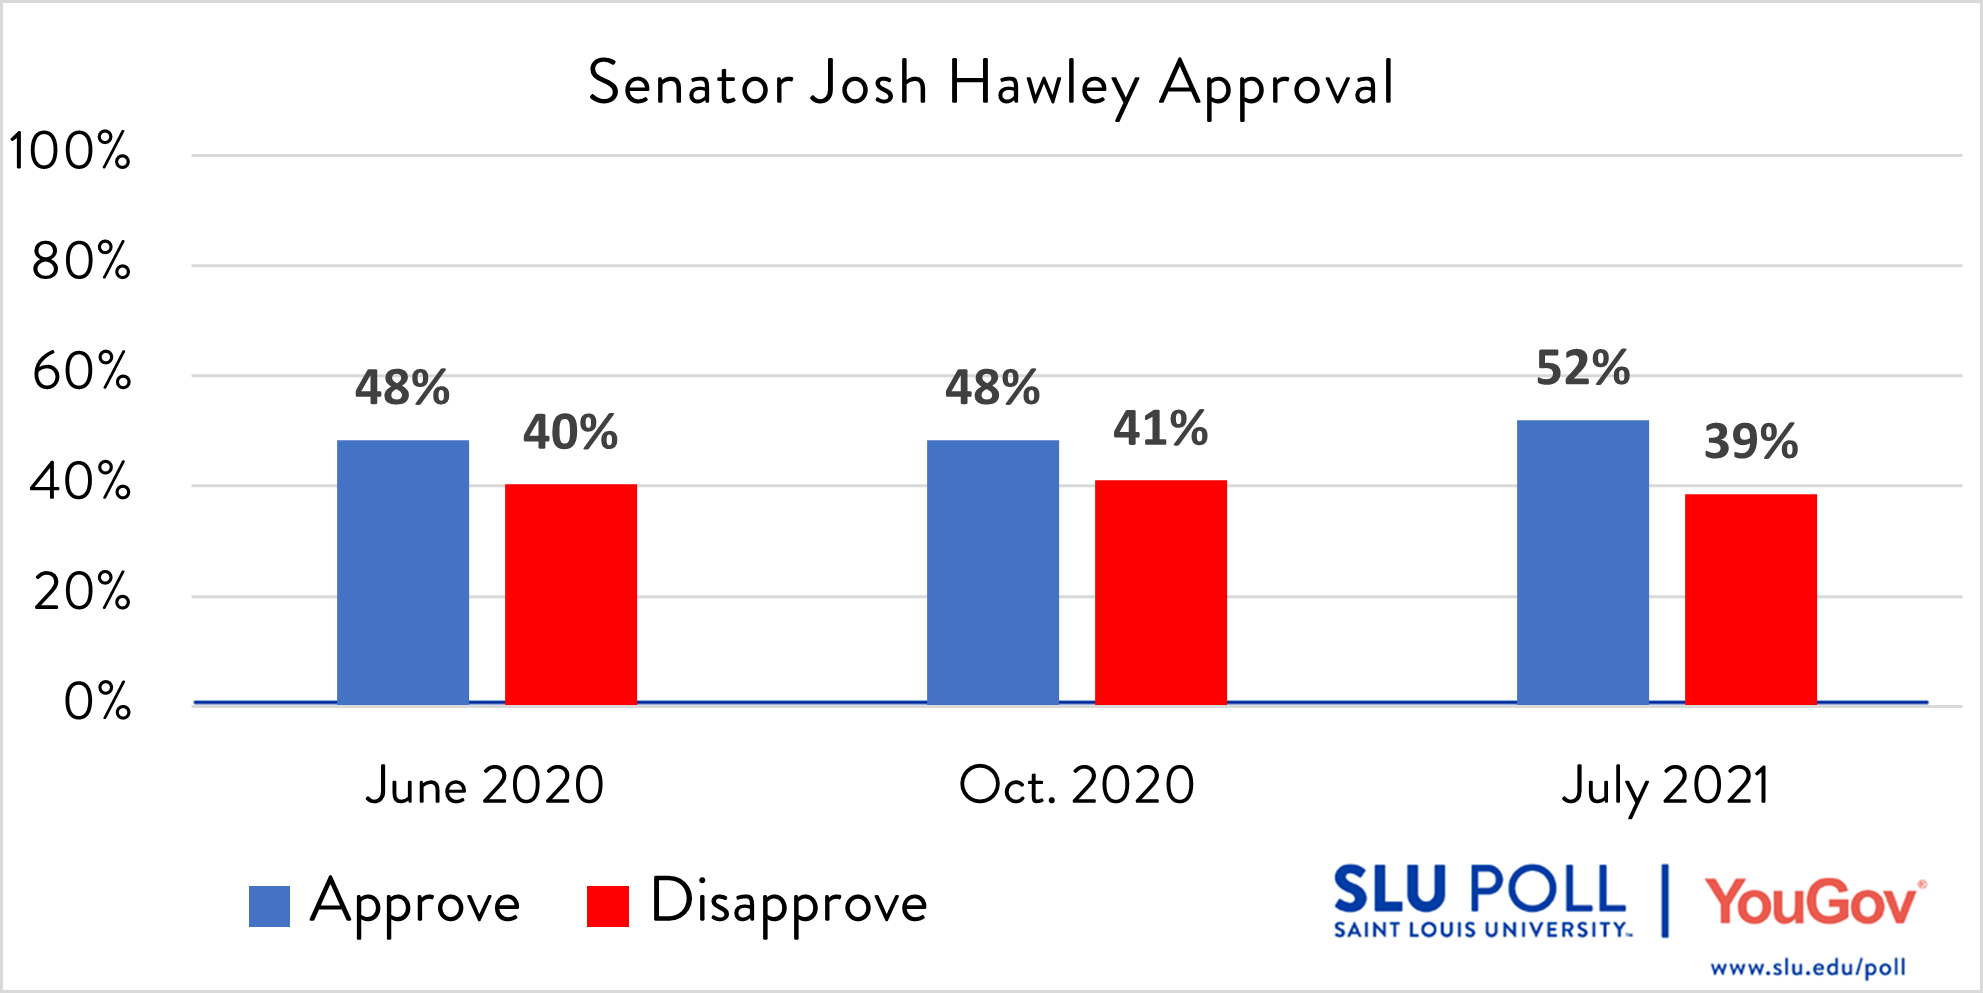 Do you approve or disapprove of the way each is doing their job…Senator Josh Hawley?  - Strongly Approve: 28% - Approve: 24% - Disapprove: 6% - Strongly Disapprove: 32%  - Not Sure: 9%